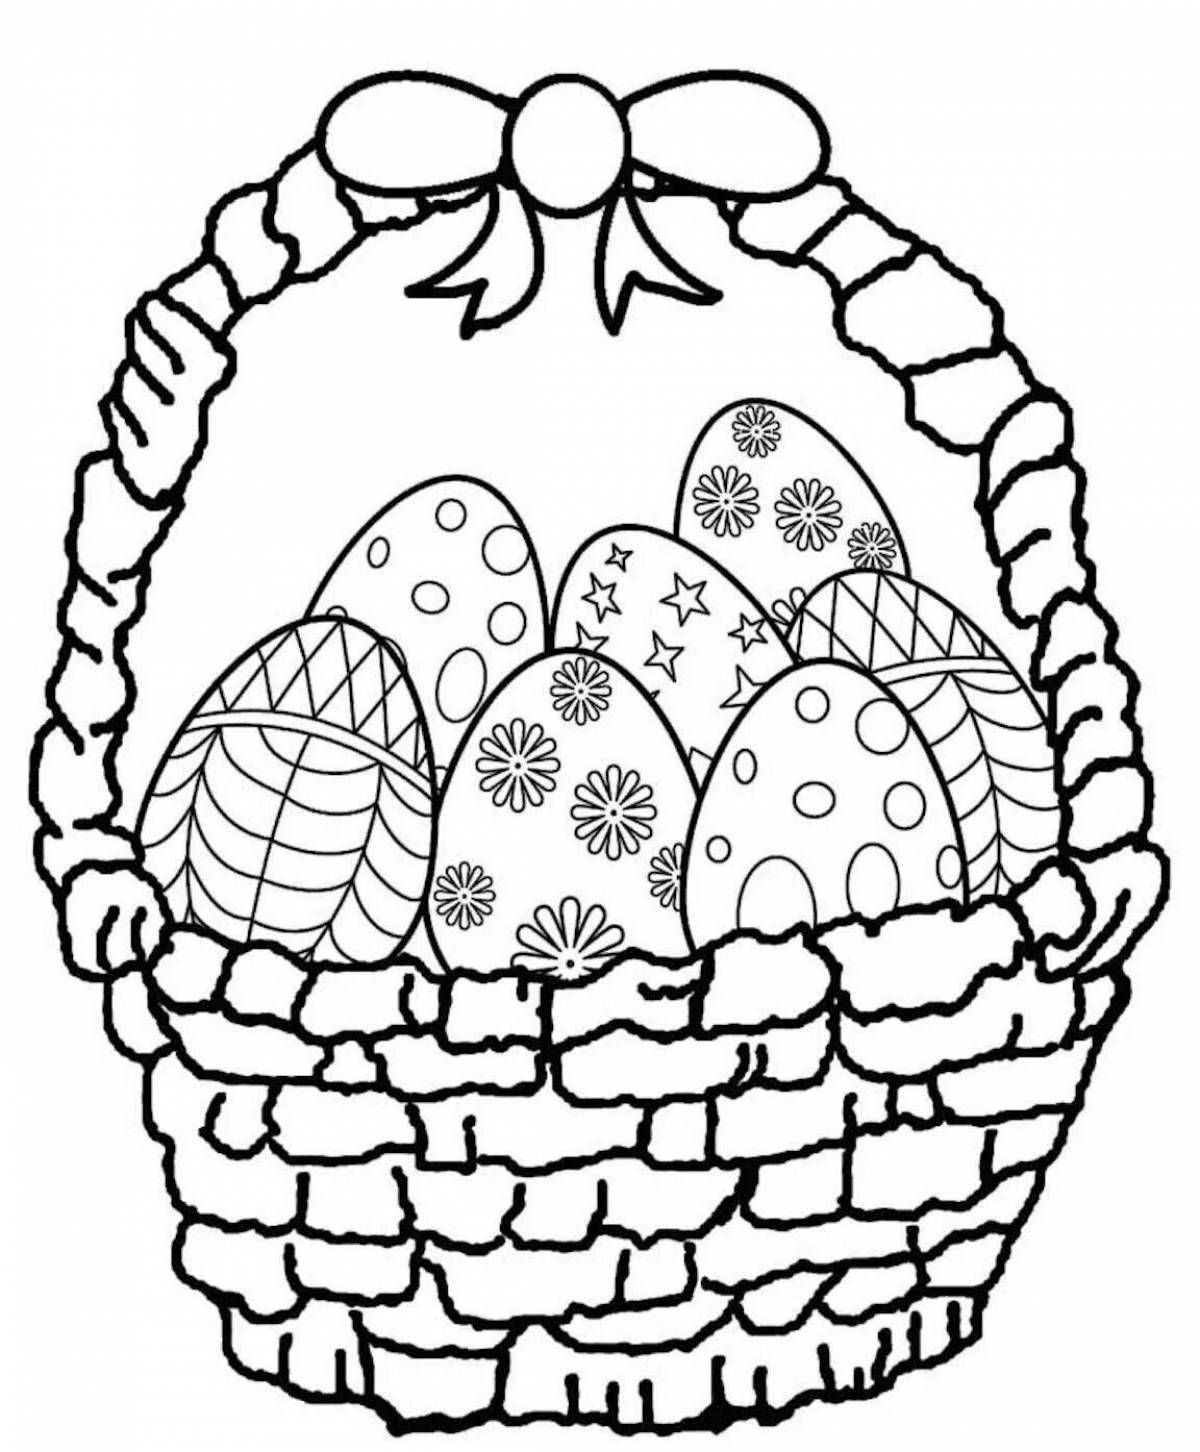 Glowing coloring pages with Easter symbols